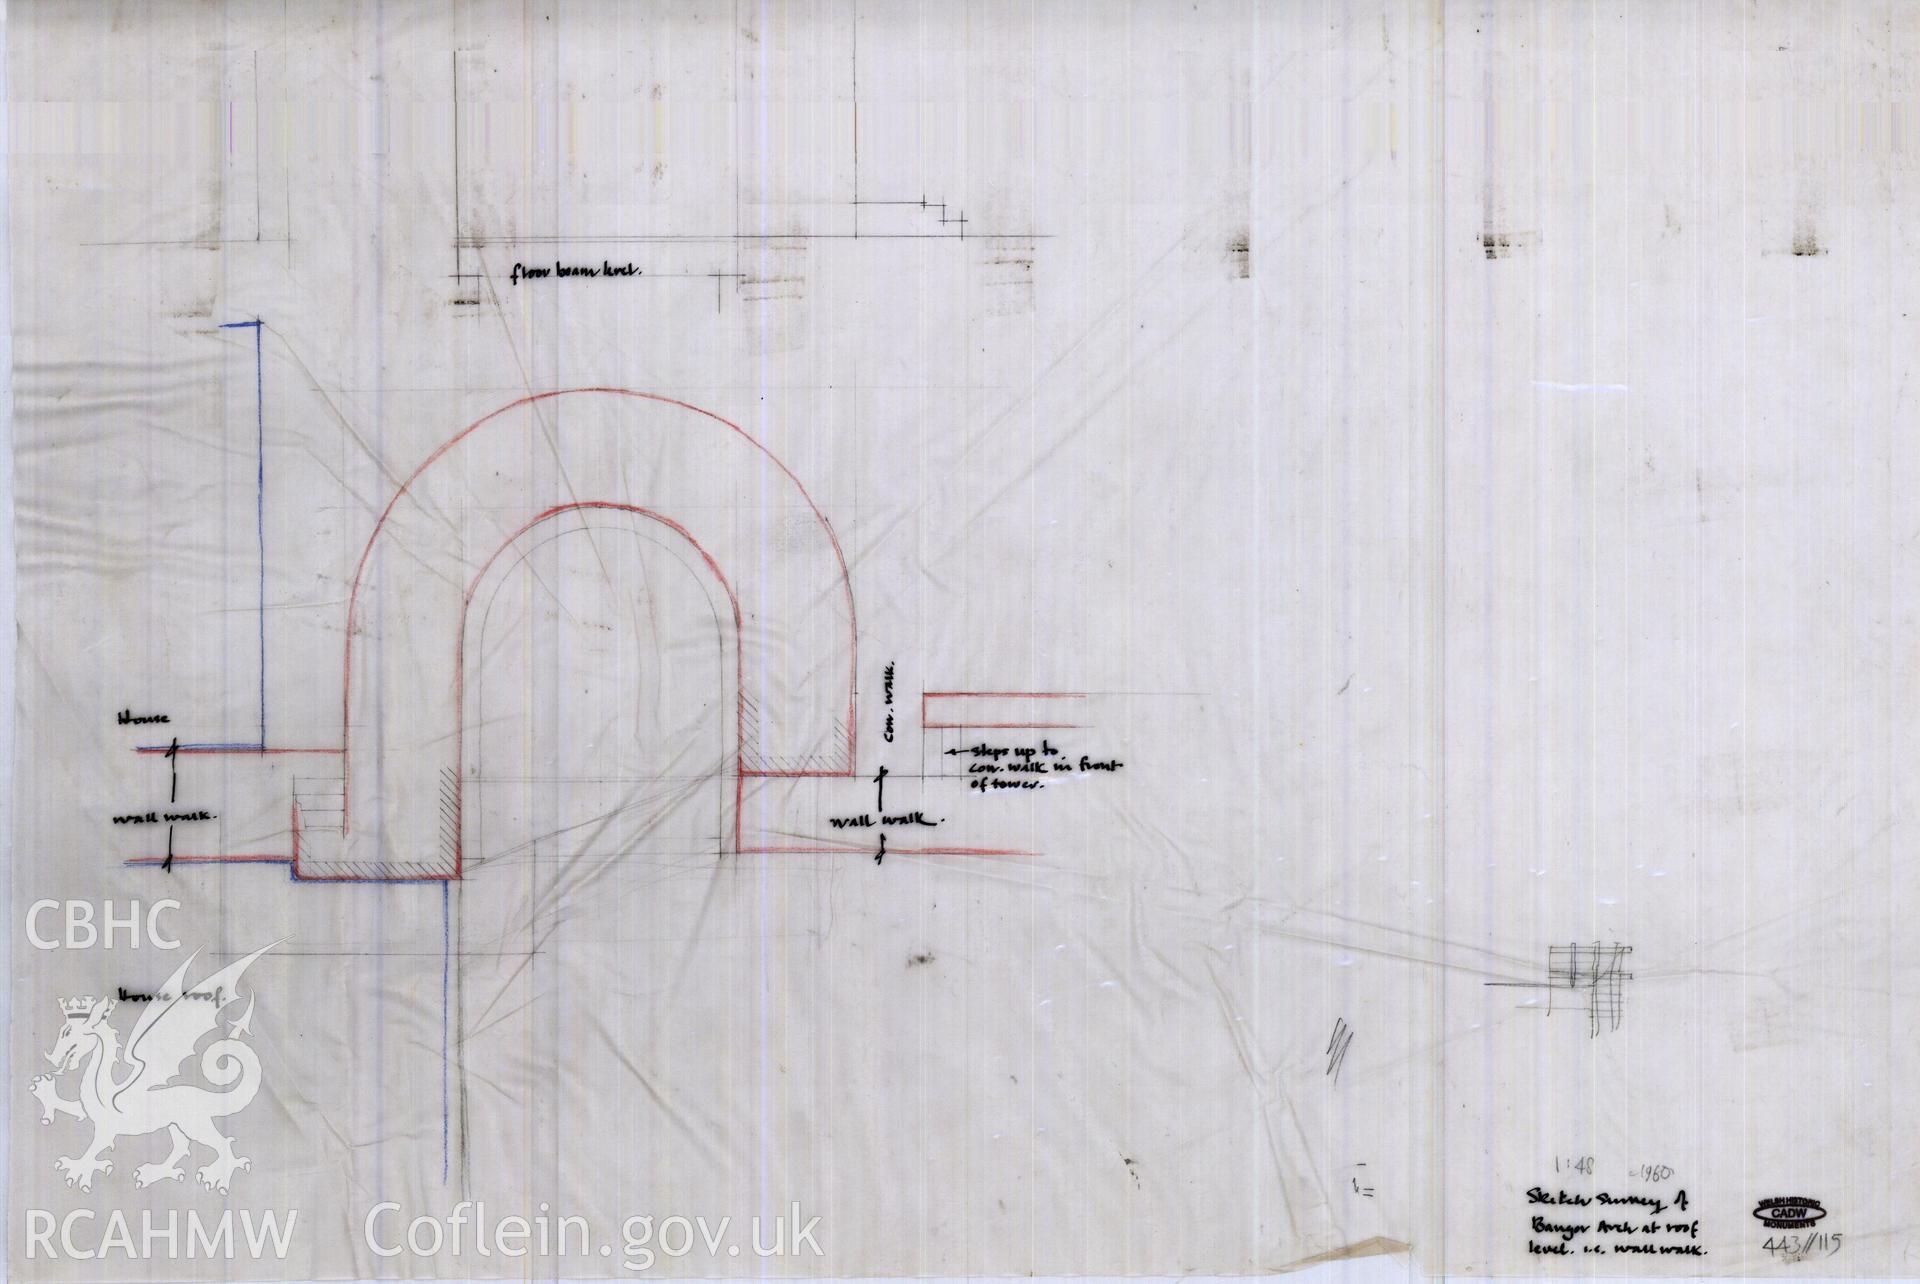 Digital copy of a Cadw Guardianship monument drawing, Conwy Castle, sketch survey of Bangor Arch at roof level, ie wall walk, Cadw ref 443//115. Scale 1:48, c.1960.